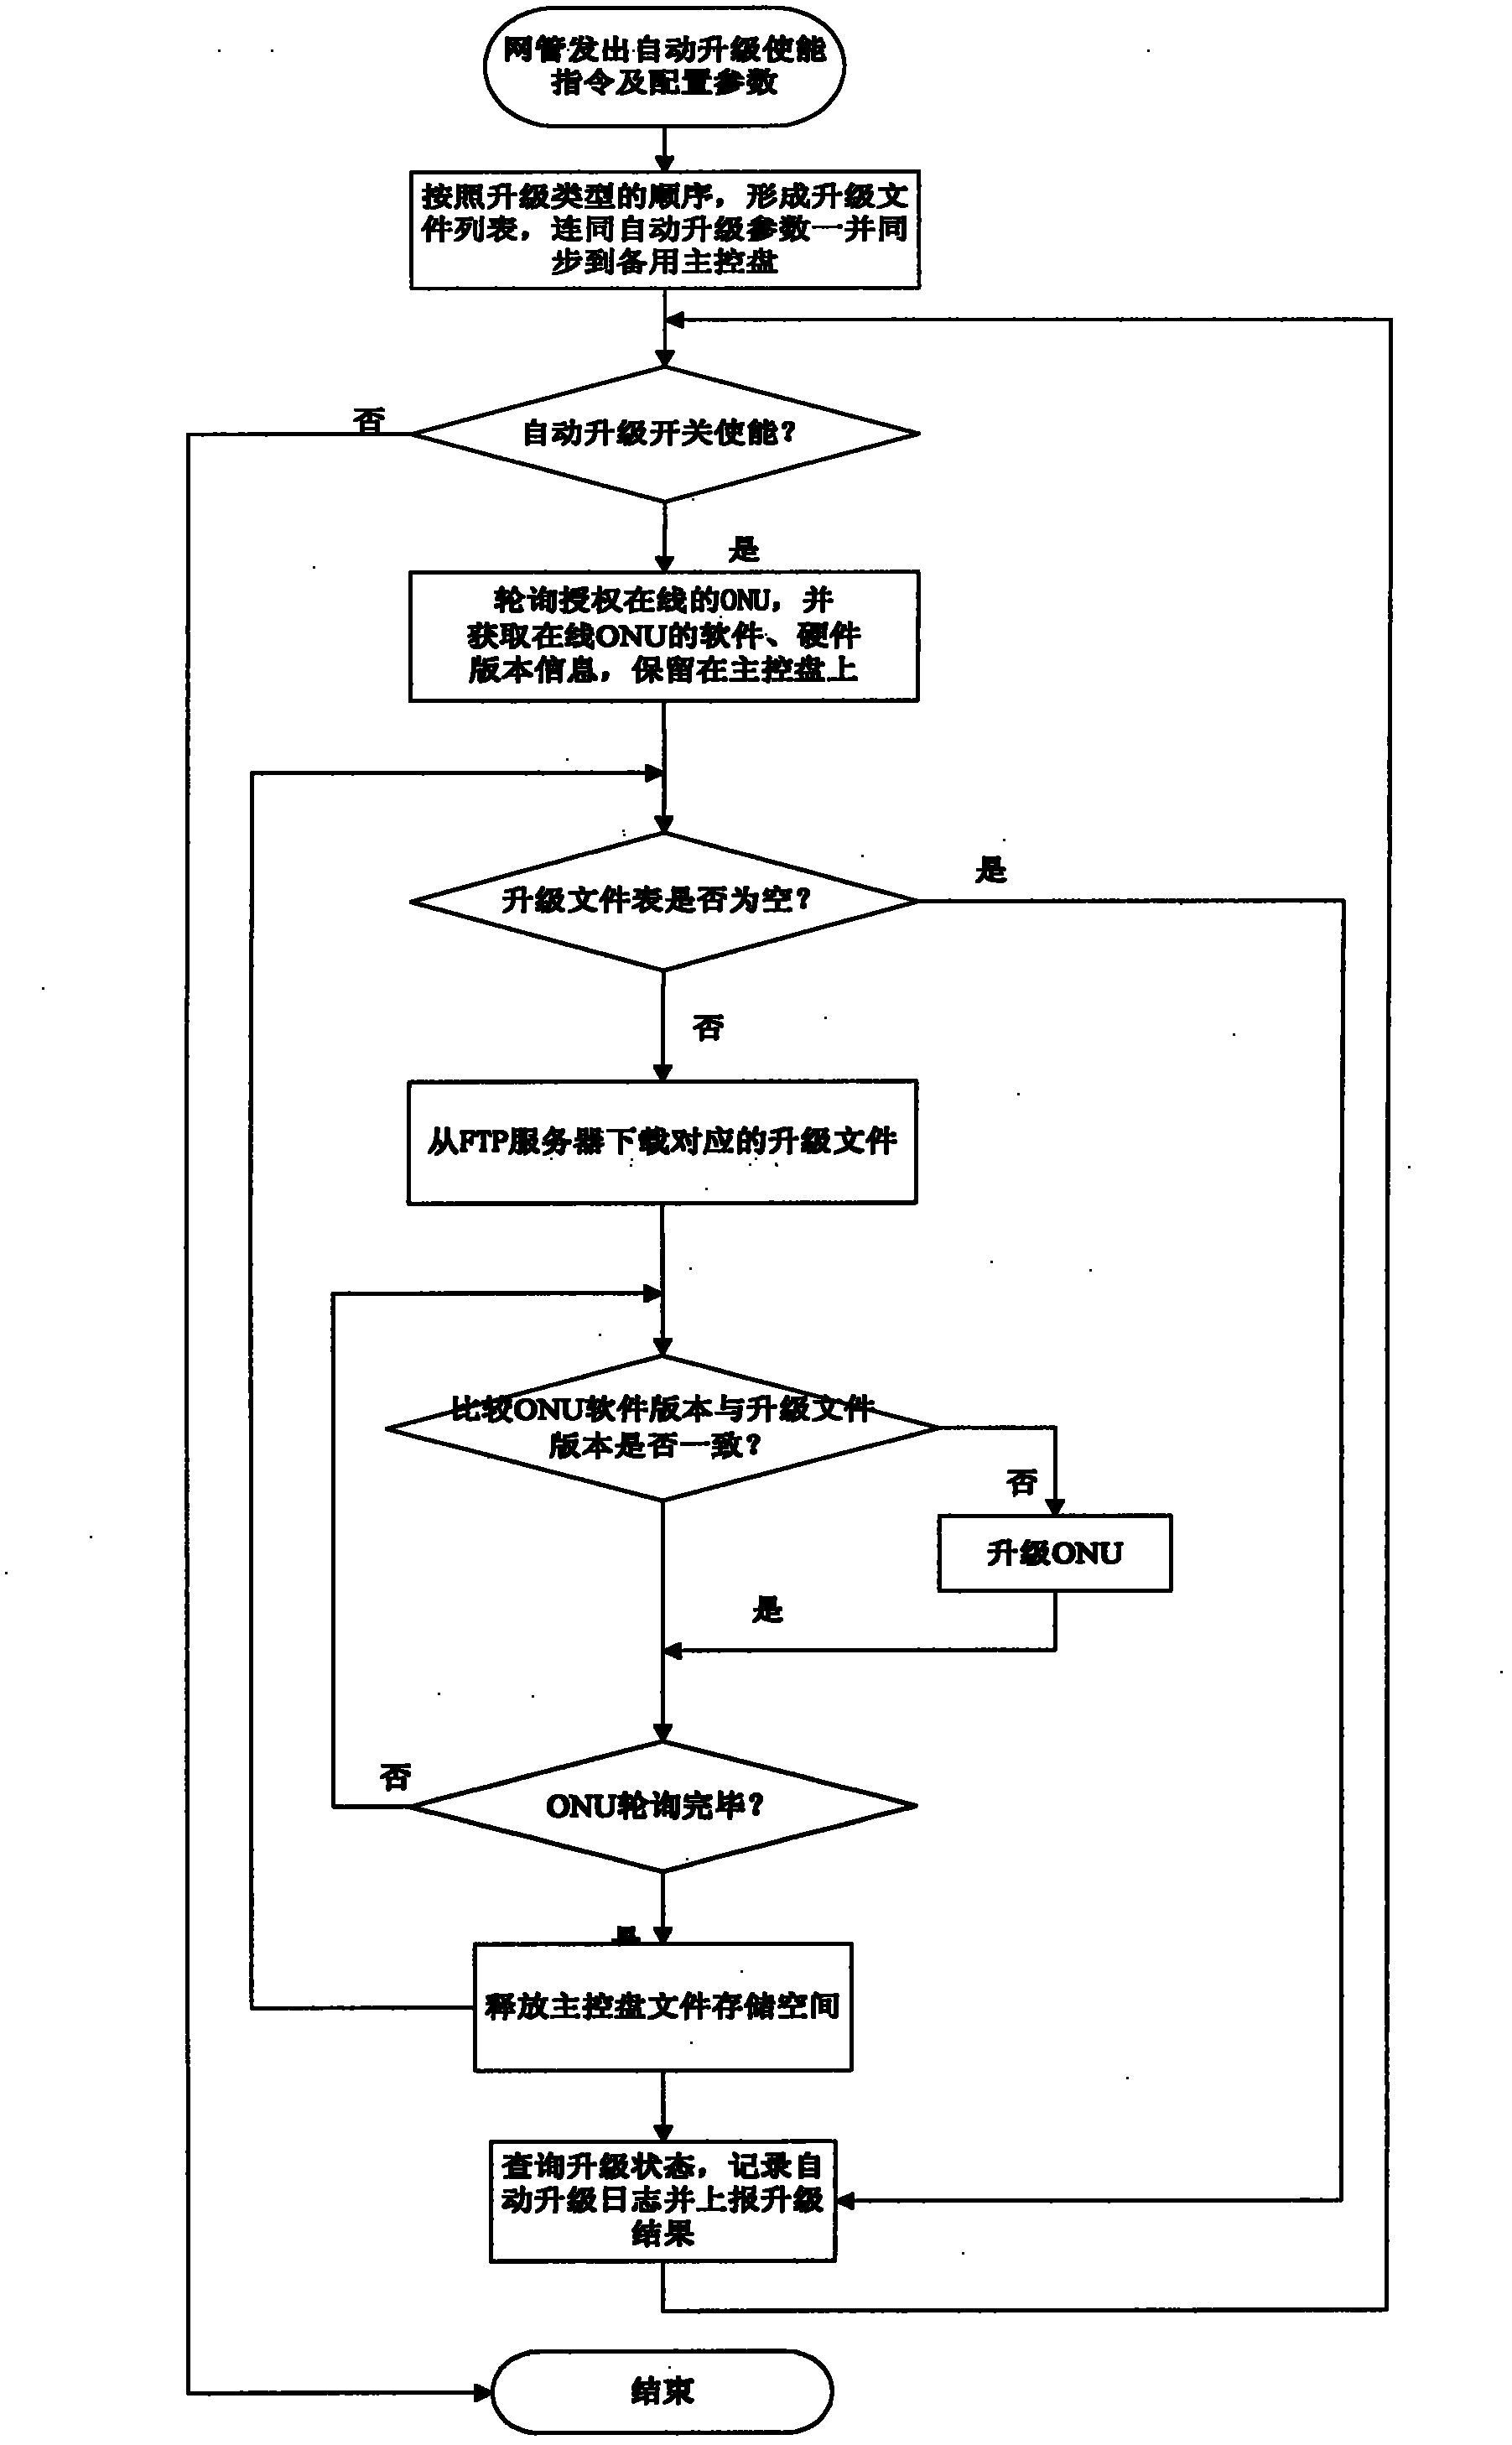 Method and system for multi-ONU (optical network unit) automatic upgrading in GPON (gigabit-capable passive optical network) access system